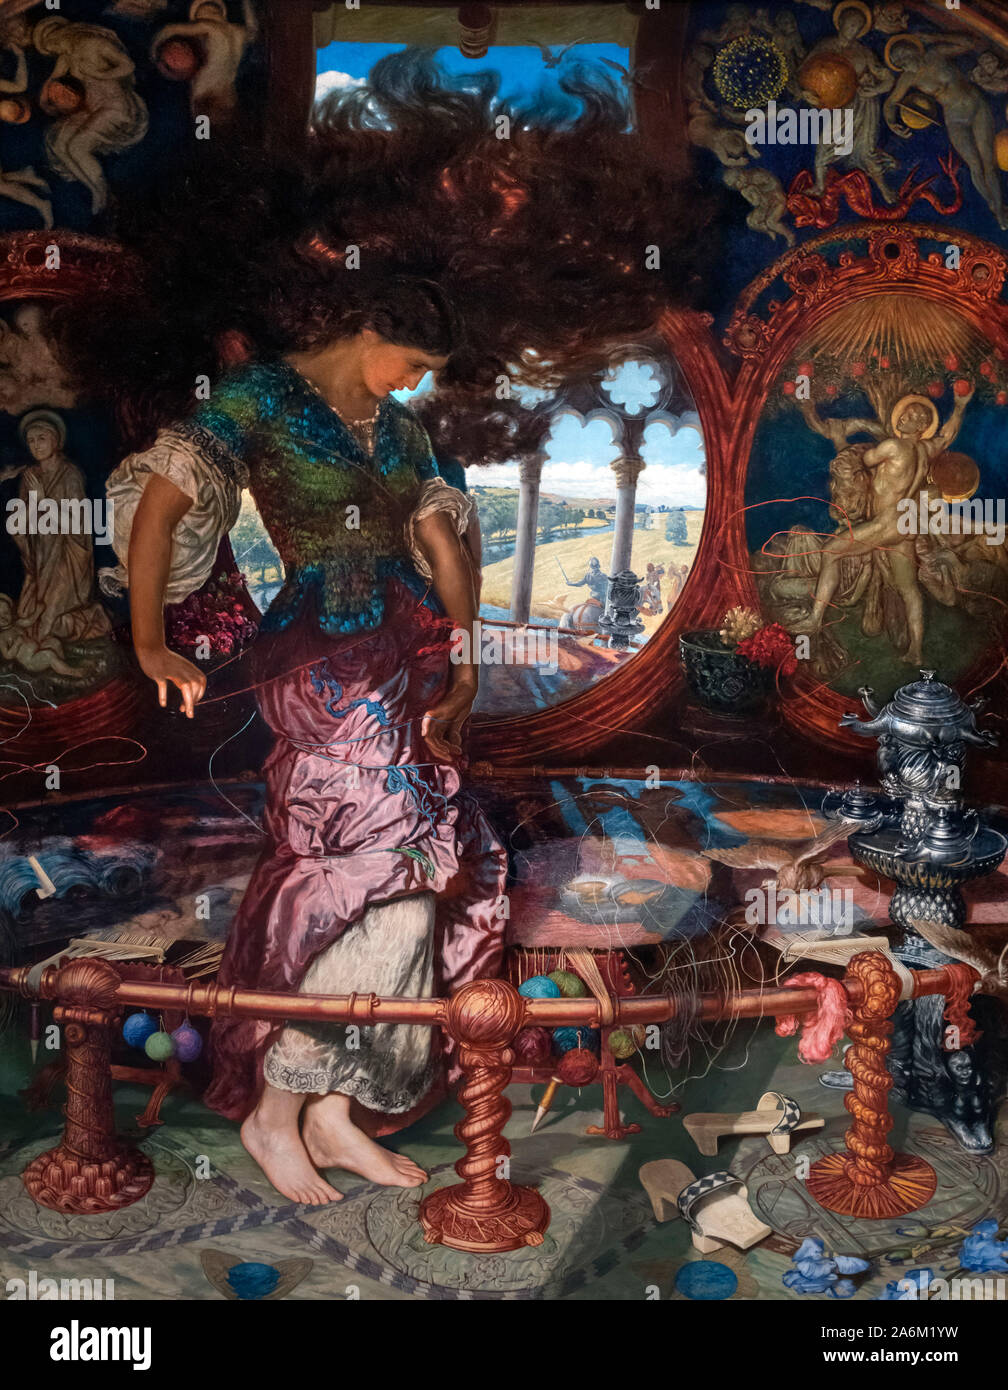 The Lady of Shalott by William Holman Hunt (1827-1910), oil on canvas, c.1888-1905. Holman Hunt was a leading figure in the 19th century Pre-Raphaelite Movement. Stock Photo